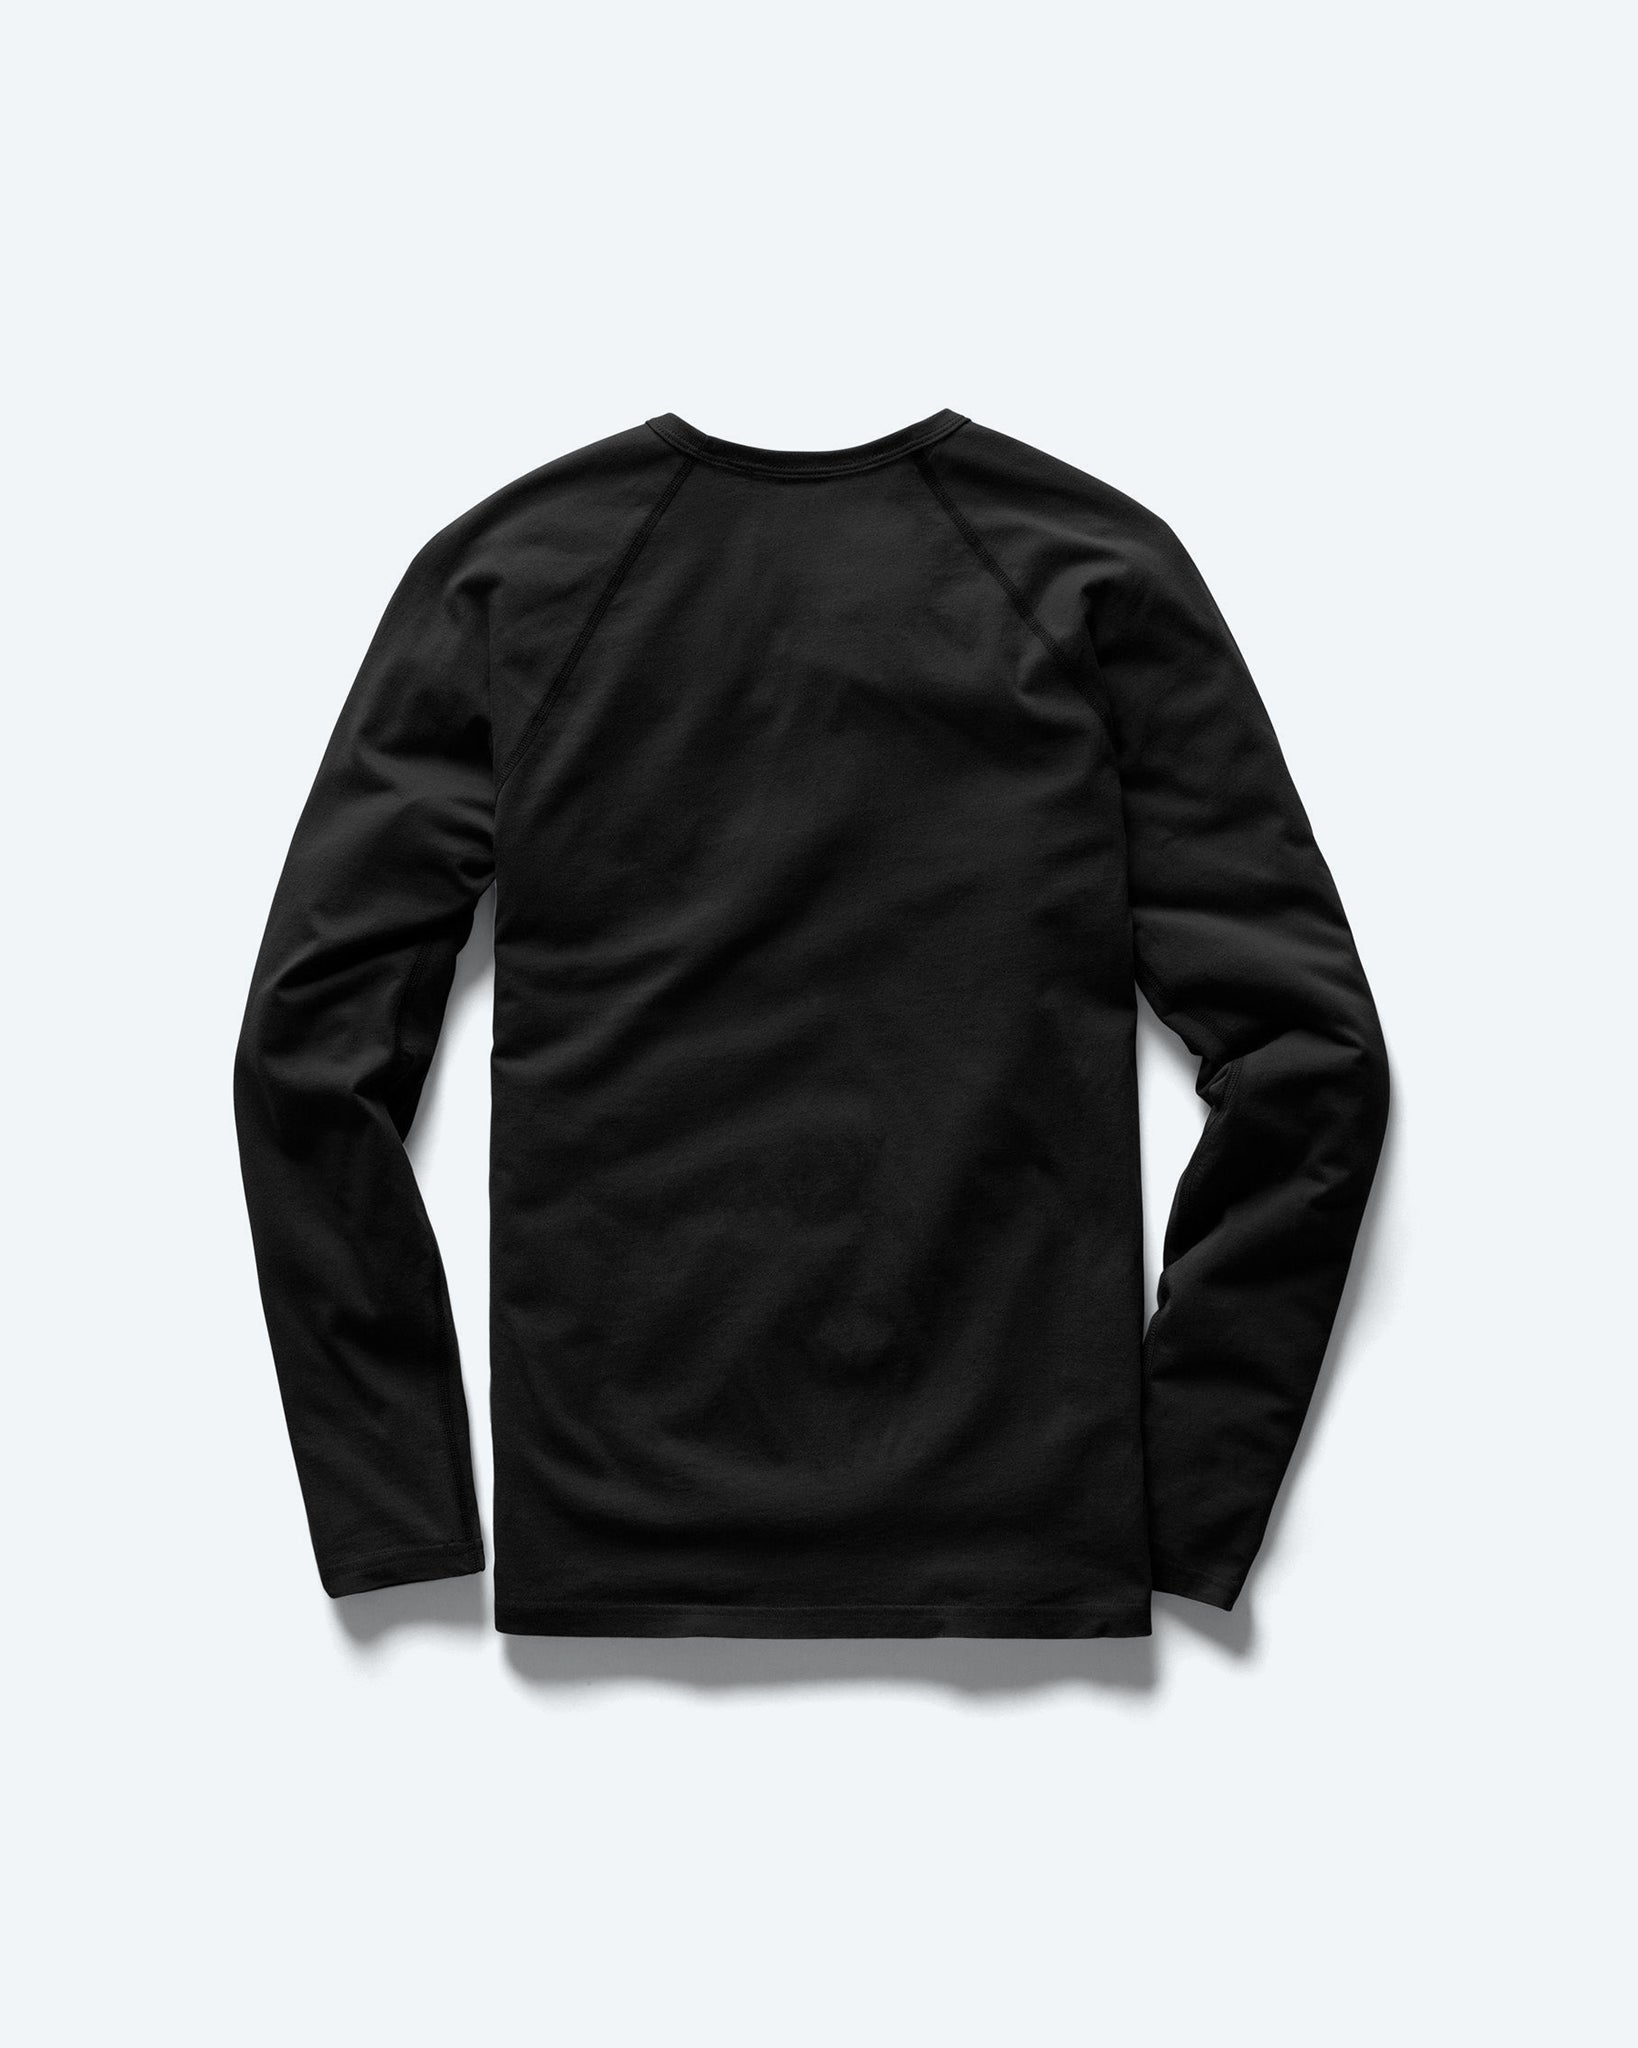 Distressed Black Jersey Layer Long Sleeve Tee - Assembly New York